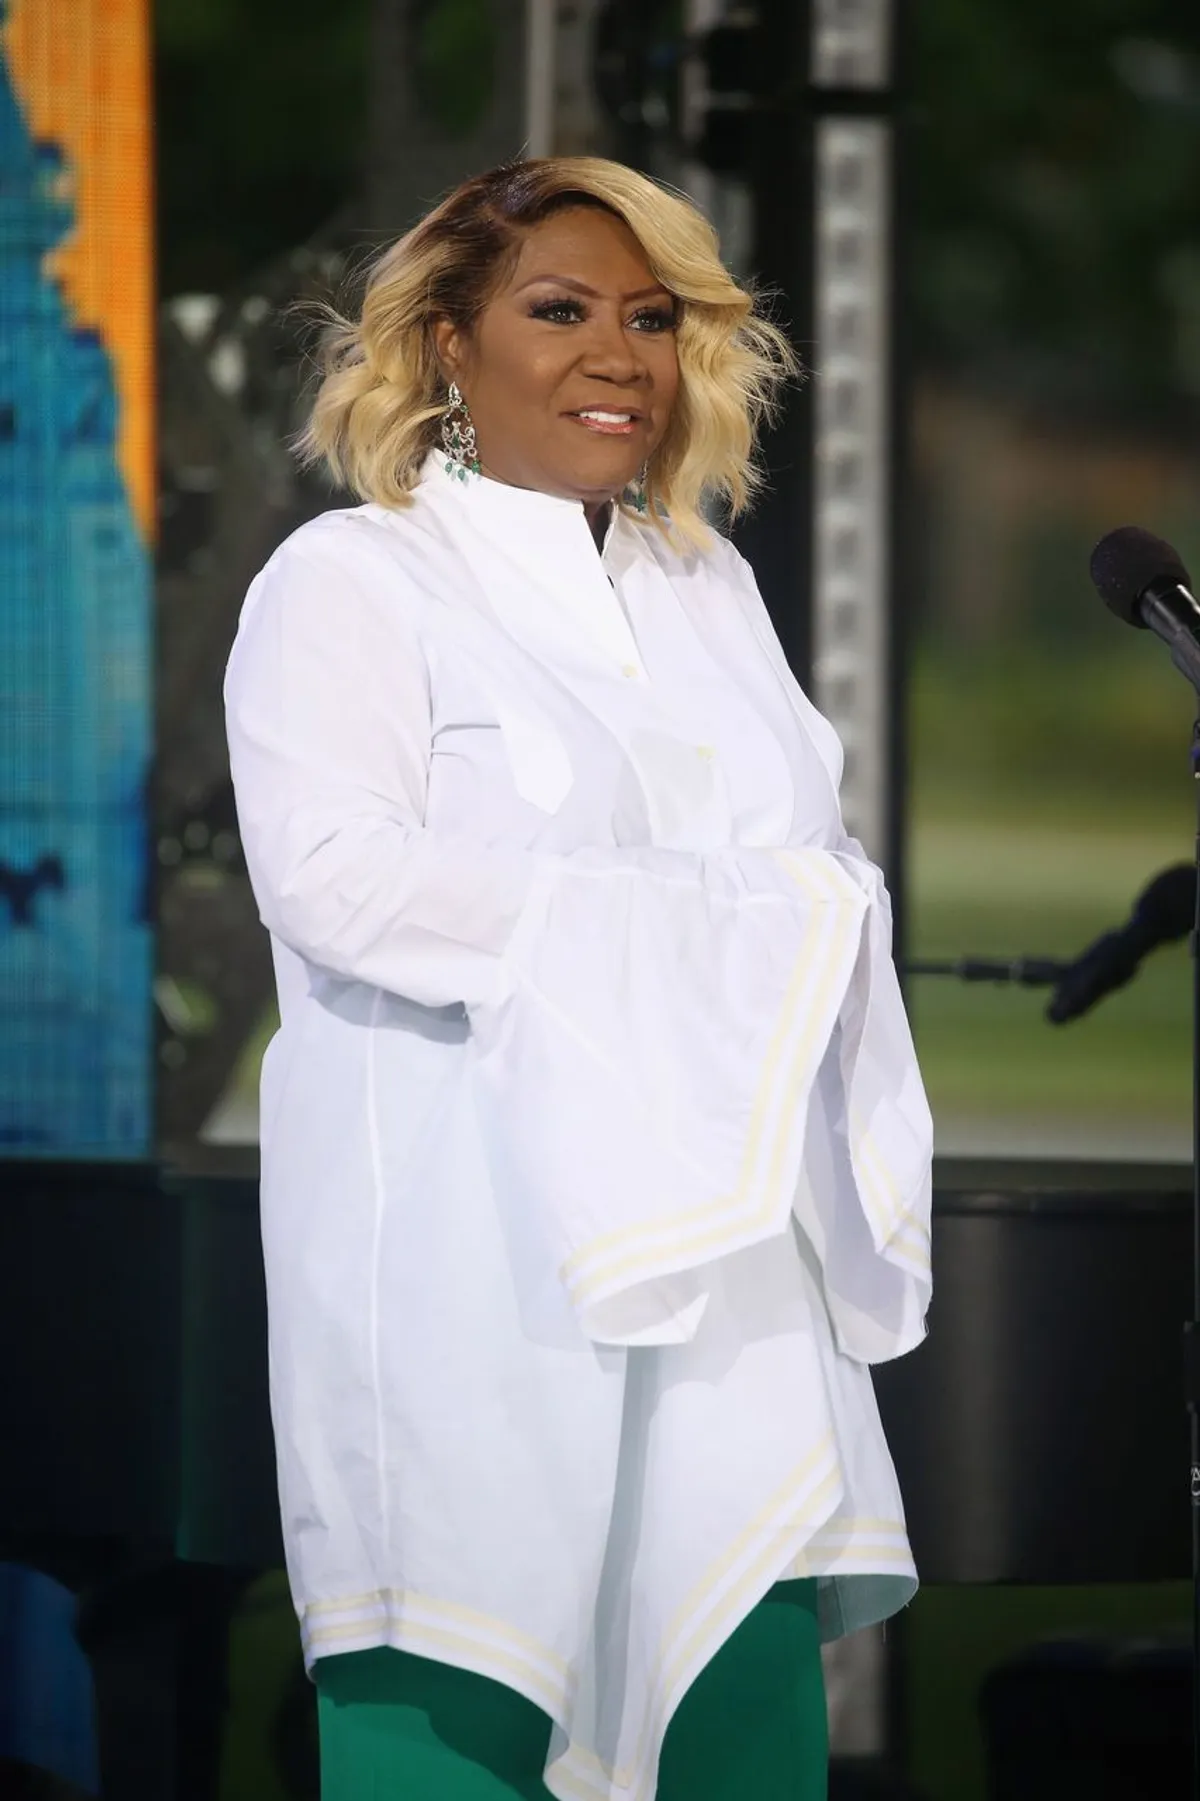 Patti LaBelle during ABC's "Good Morning America" live broadcast on June 13, 2019 in Philadelphia, Pennsylvania. | Photo: Getty Images